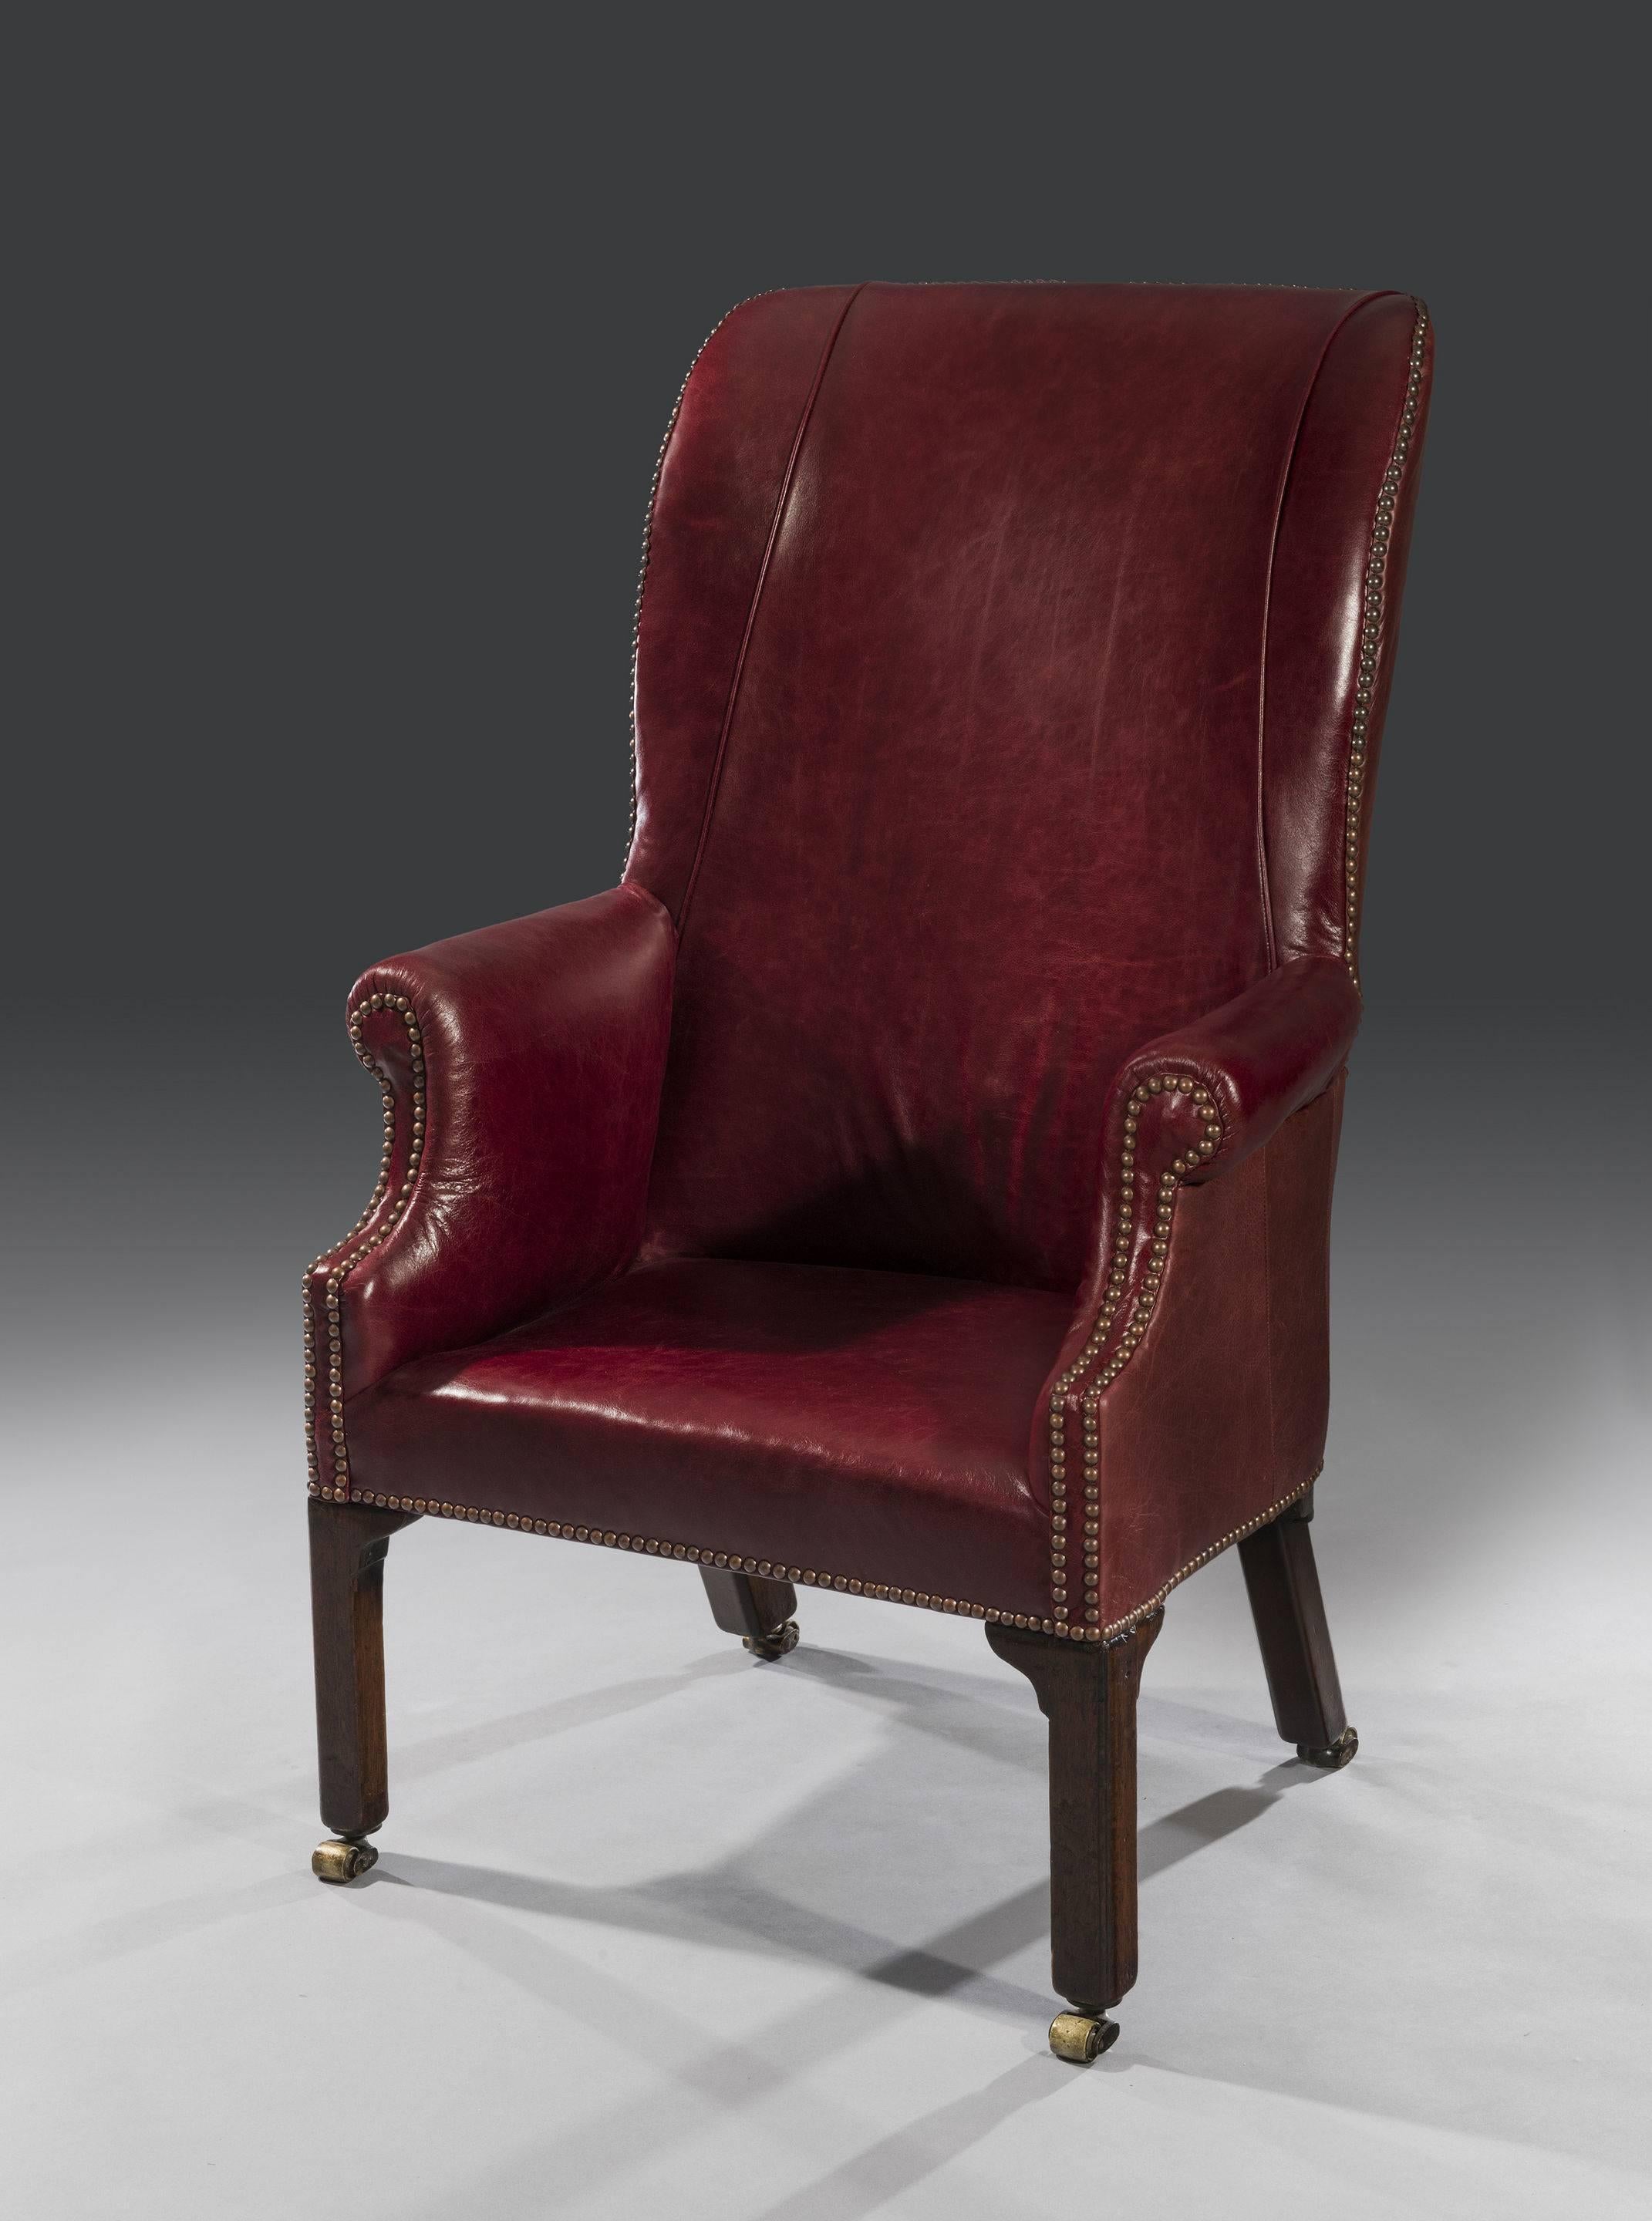 The 'horseshoe-shaped' or 'barrel-shaped' gentleman's armchair has recently been re-upholstered in a red crimson leather and has a fitted seat. The proportions are elegant and petite and the chair stands on solid Cuban mahogany outswept rear legs